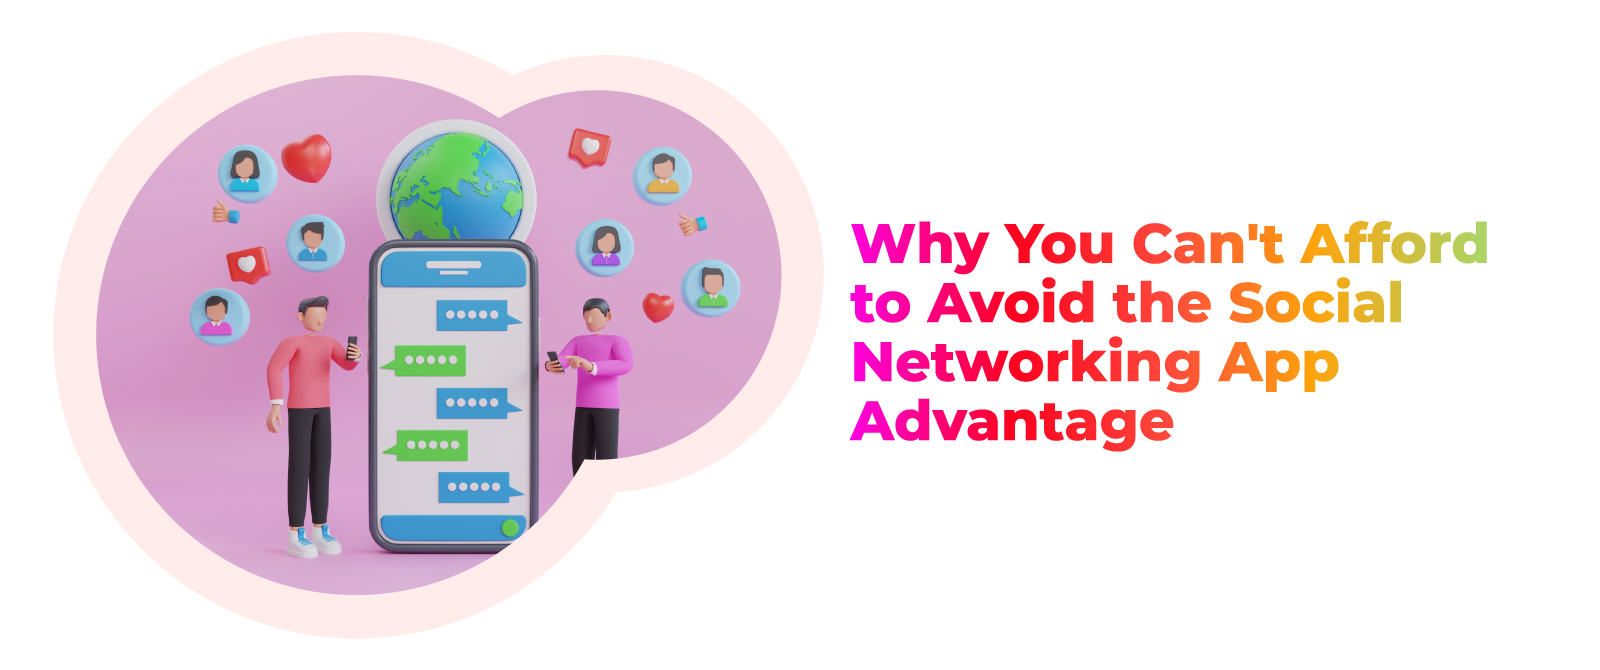 Why You Can’t Afford to Avoid the Social Networking App Advantage